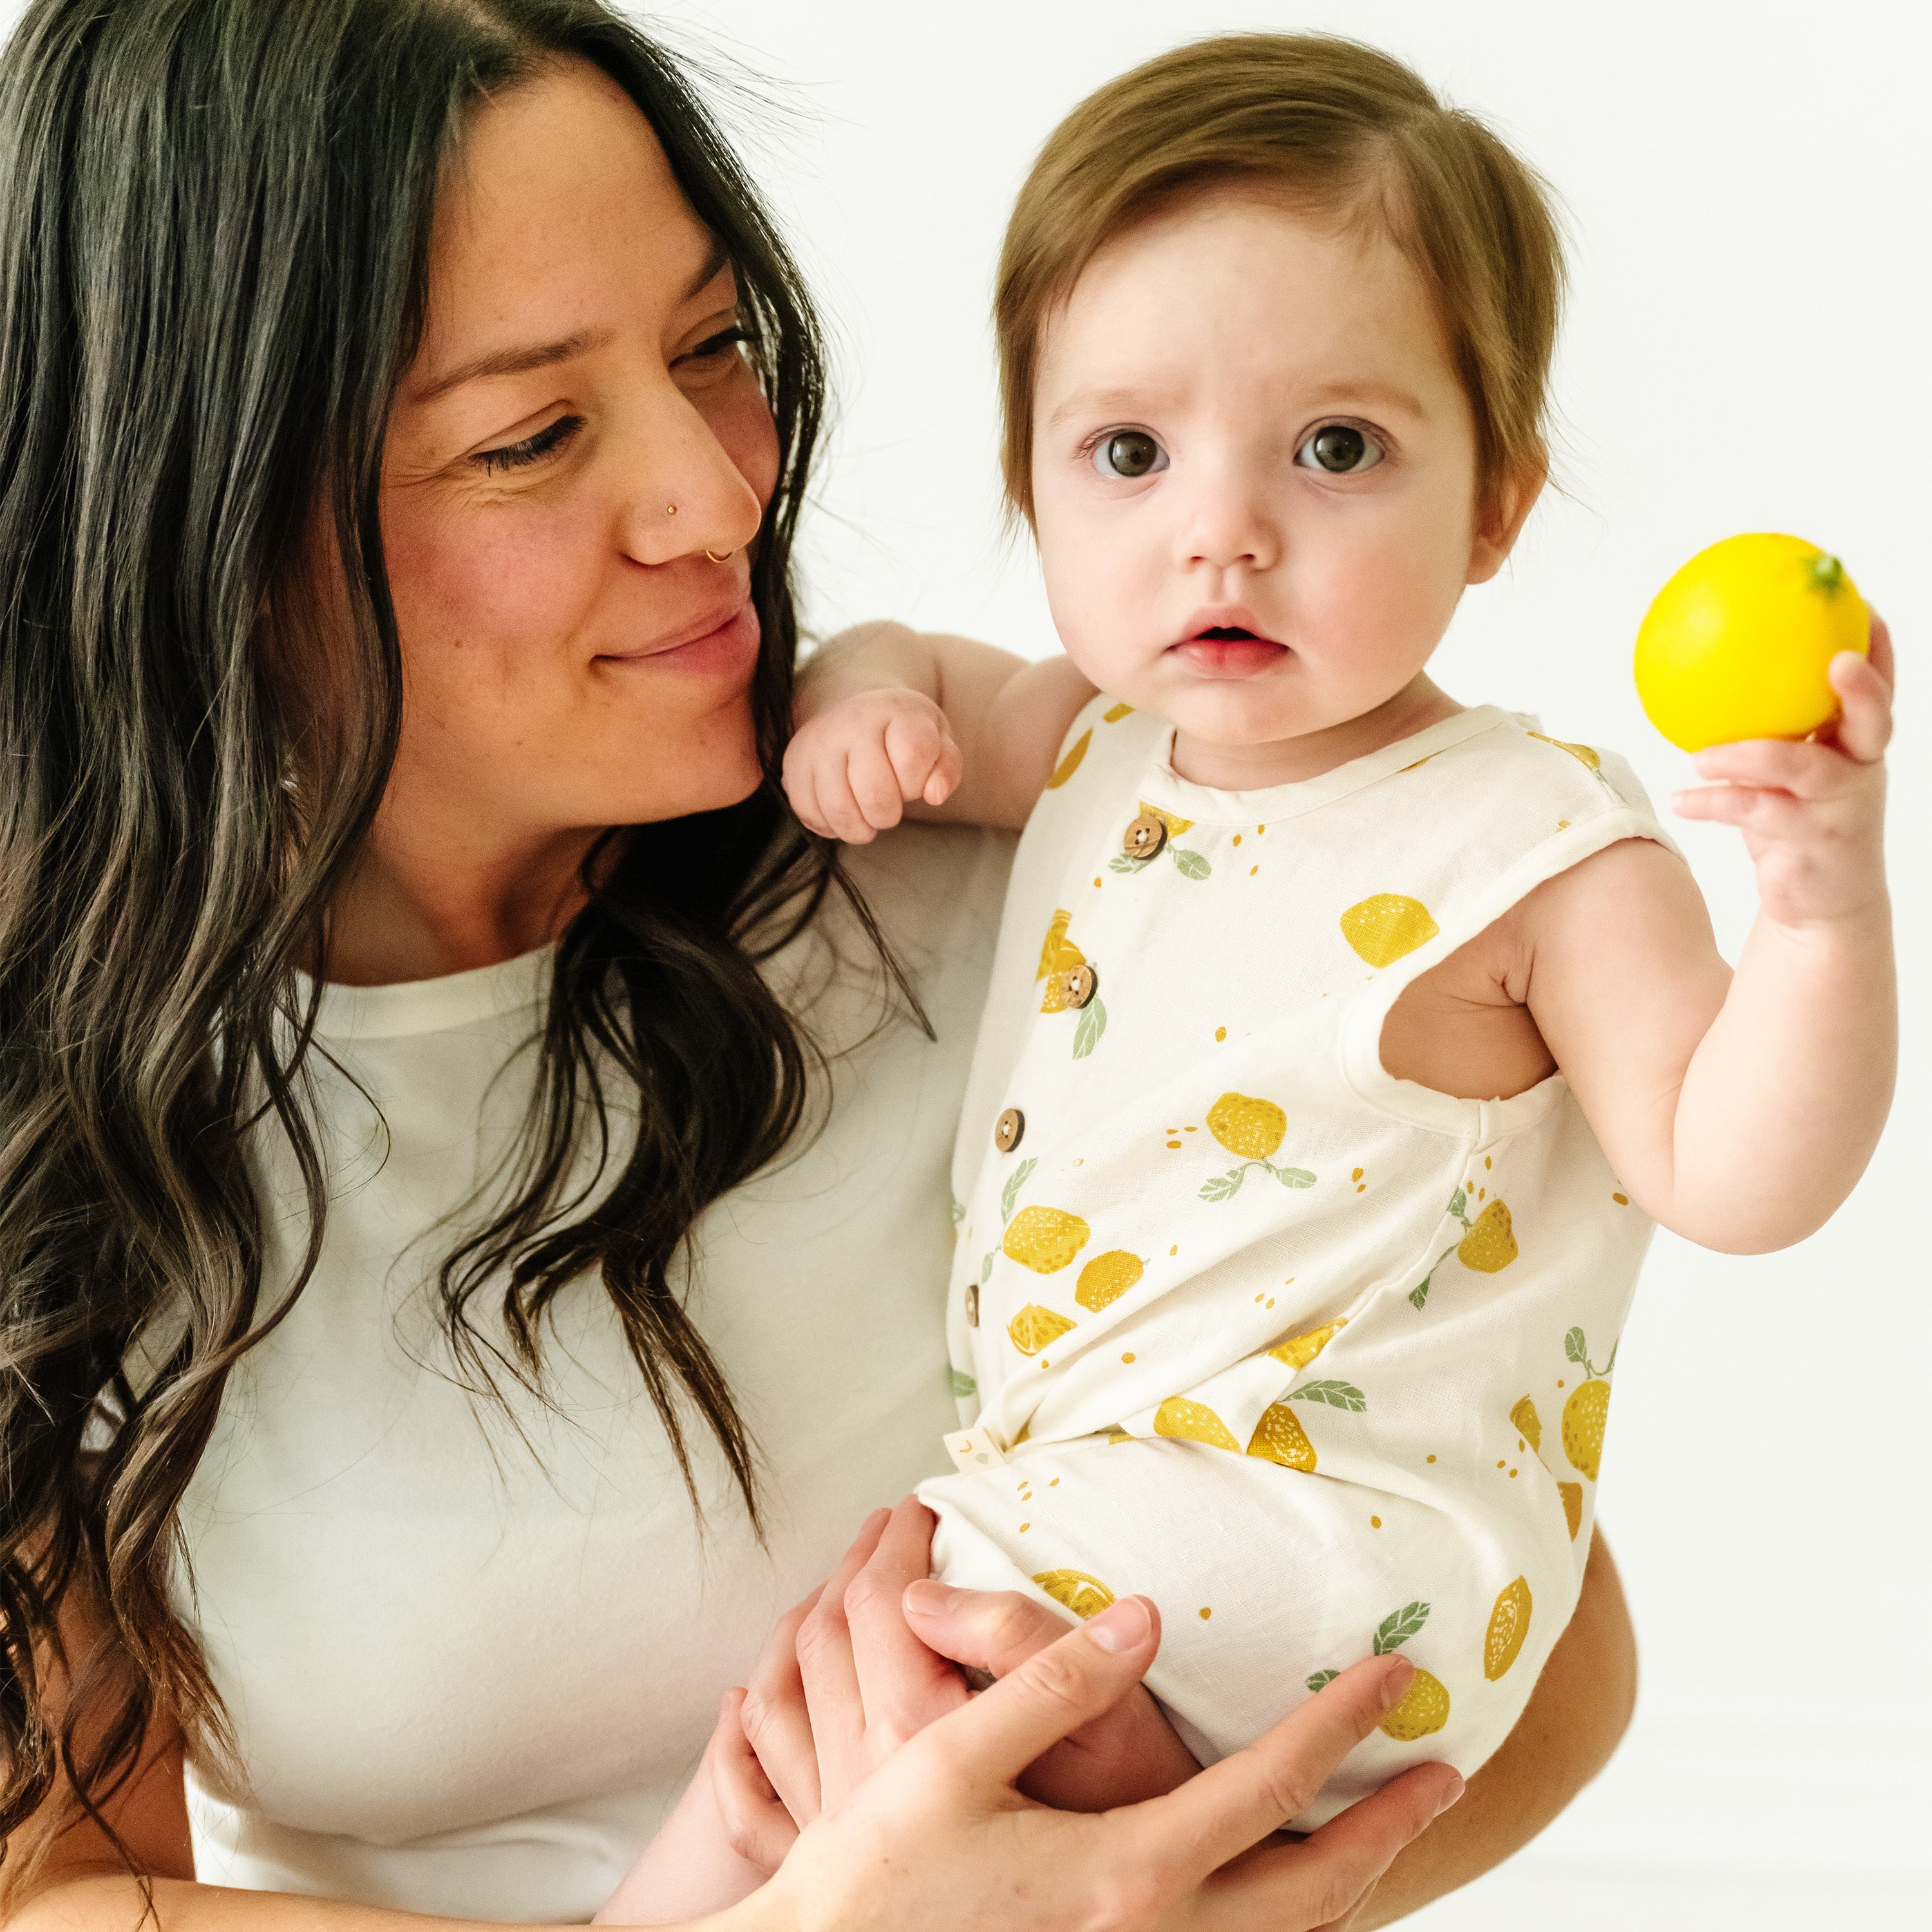 A mother lovingly looks at her baby boy, who is holding a yellow ball. Both are on a white background, with the baby wearing a Makemake Organics Organic Linen Sleeveless Bubble Romper in Citron print.